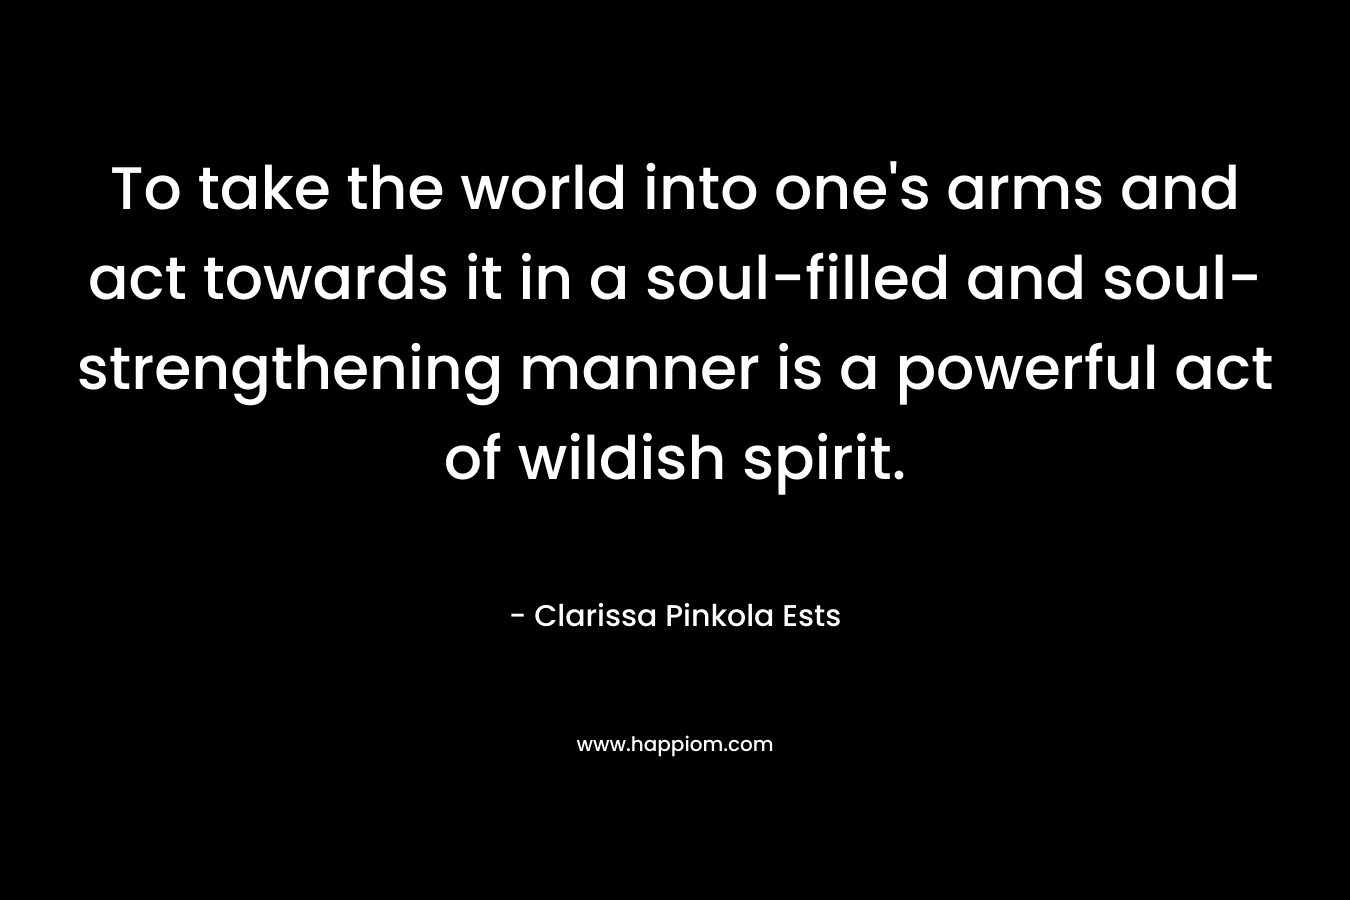 To take the world into one’s arms and act towards it in a soul-filled and soul-strengthening manner is a powerful act of wildish spirit. – Clarissa Pinkola Ests